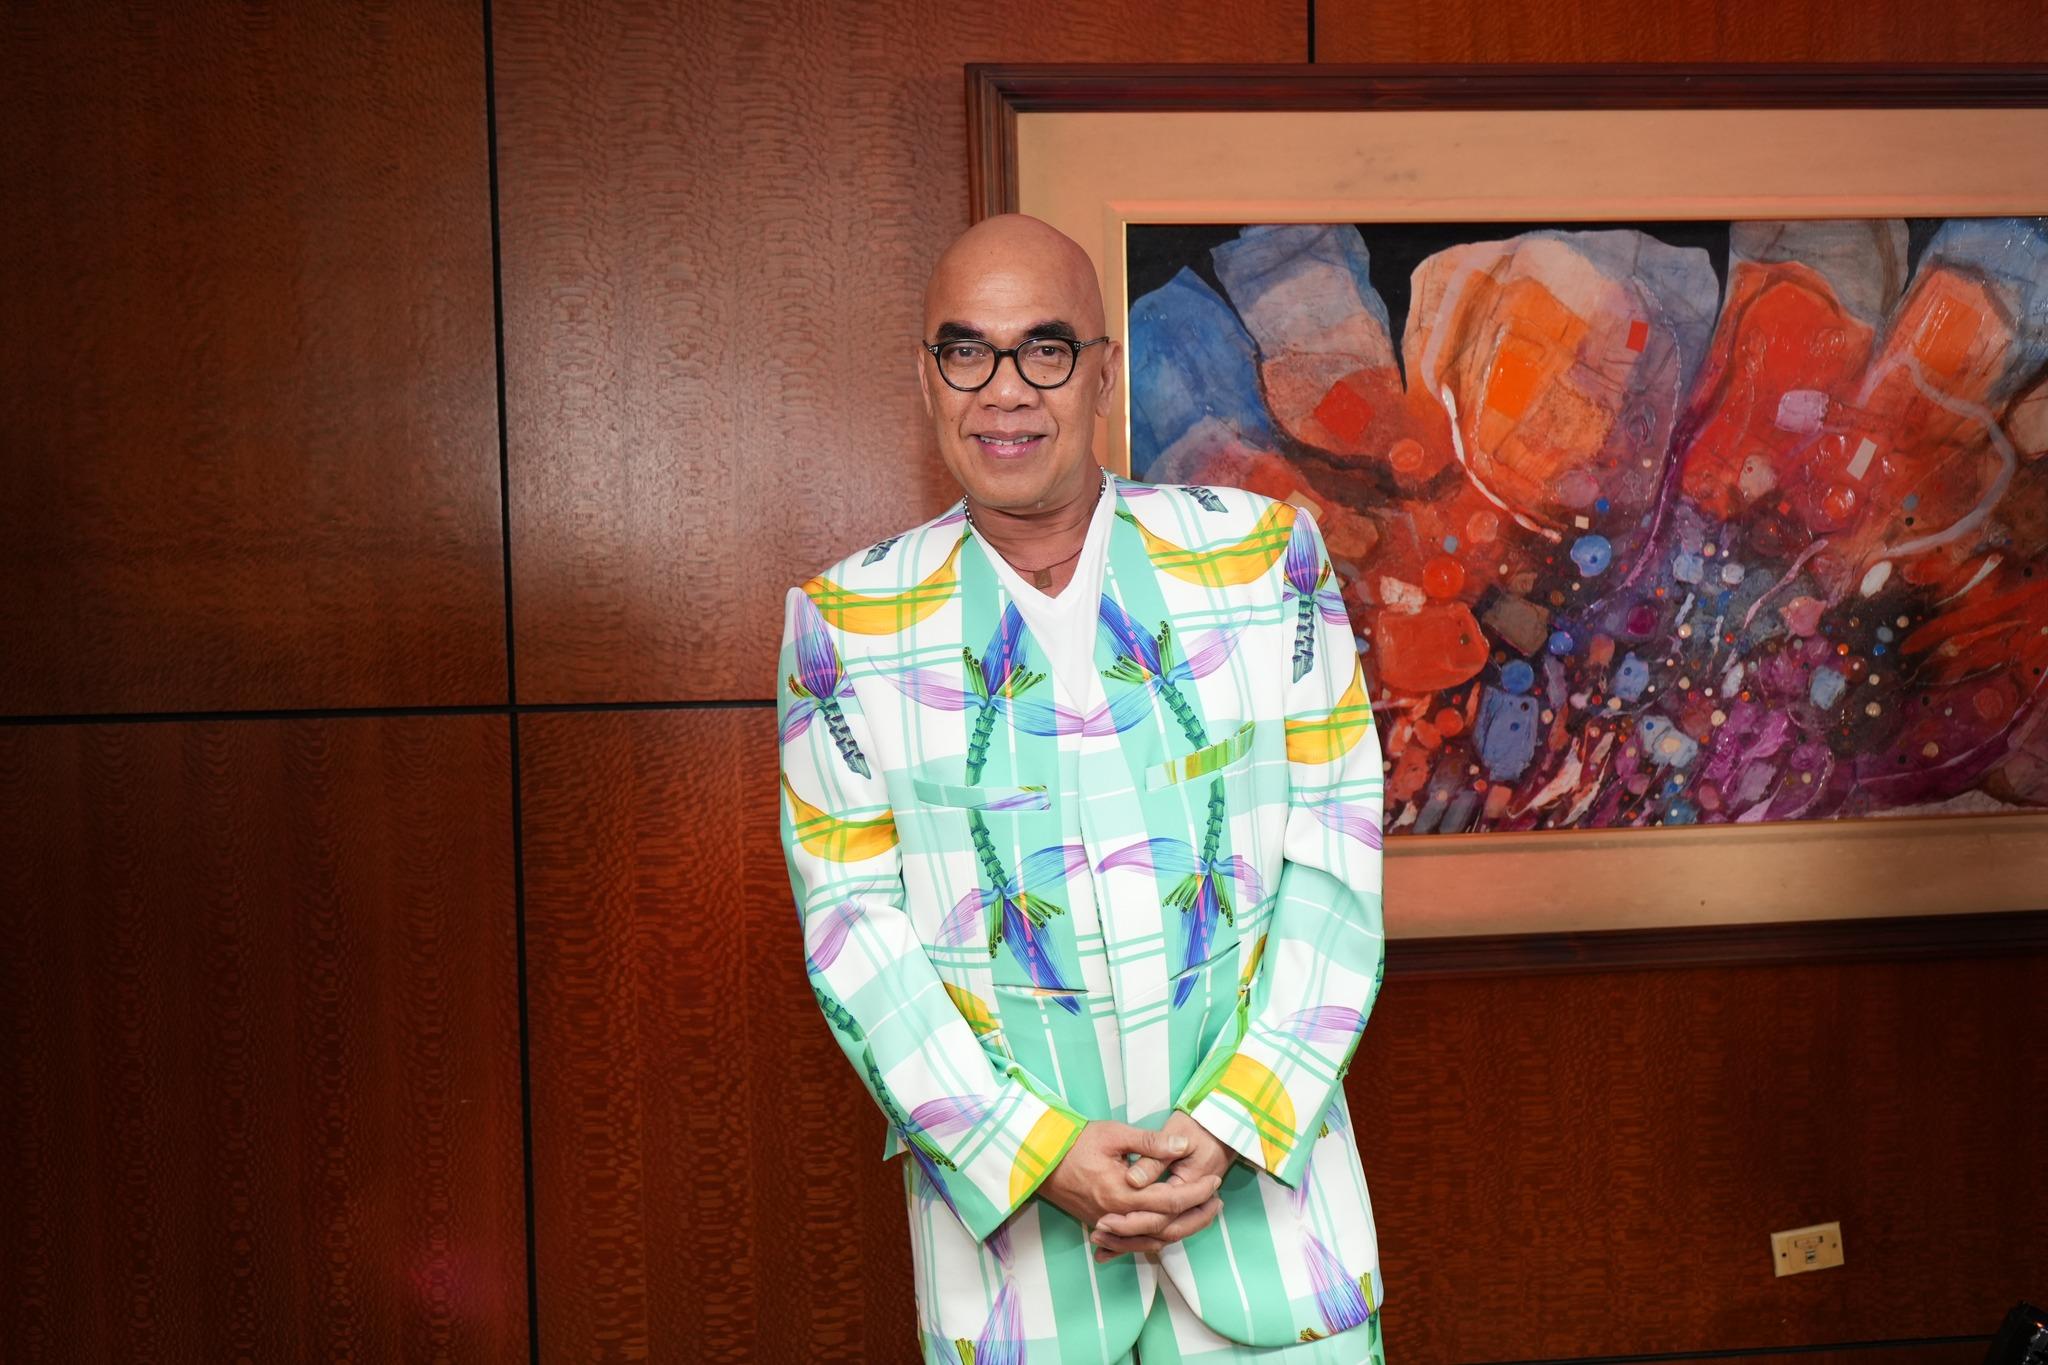 As Boy Abunda renews contract with GMA Network, he vows to continue doing his show 'with gratitude and love'